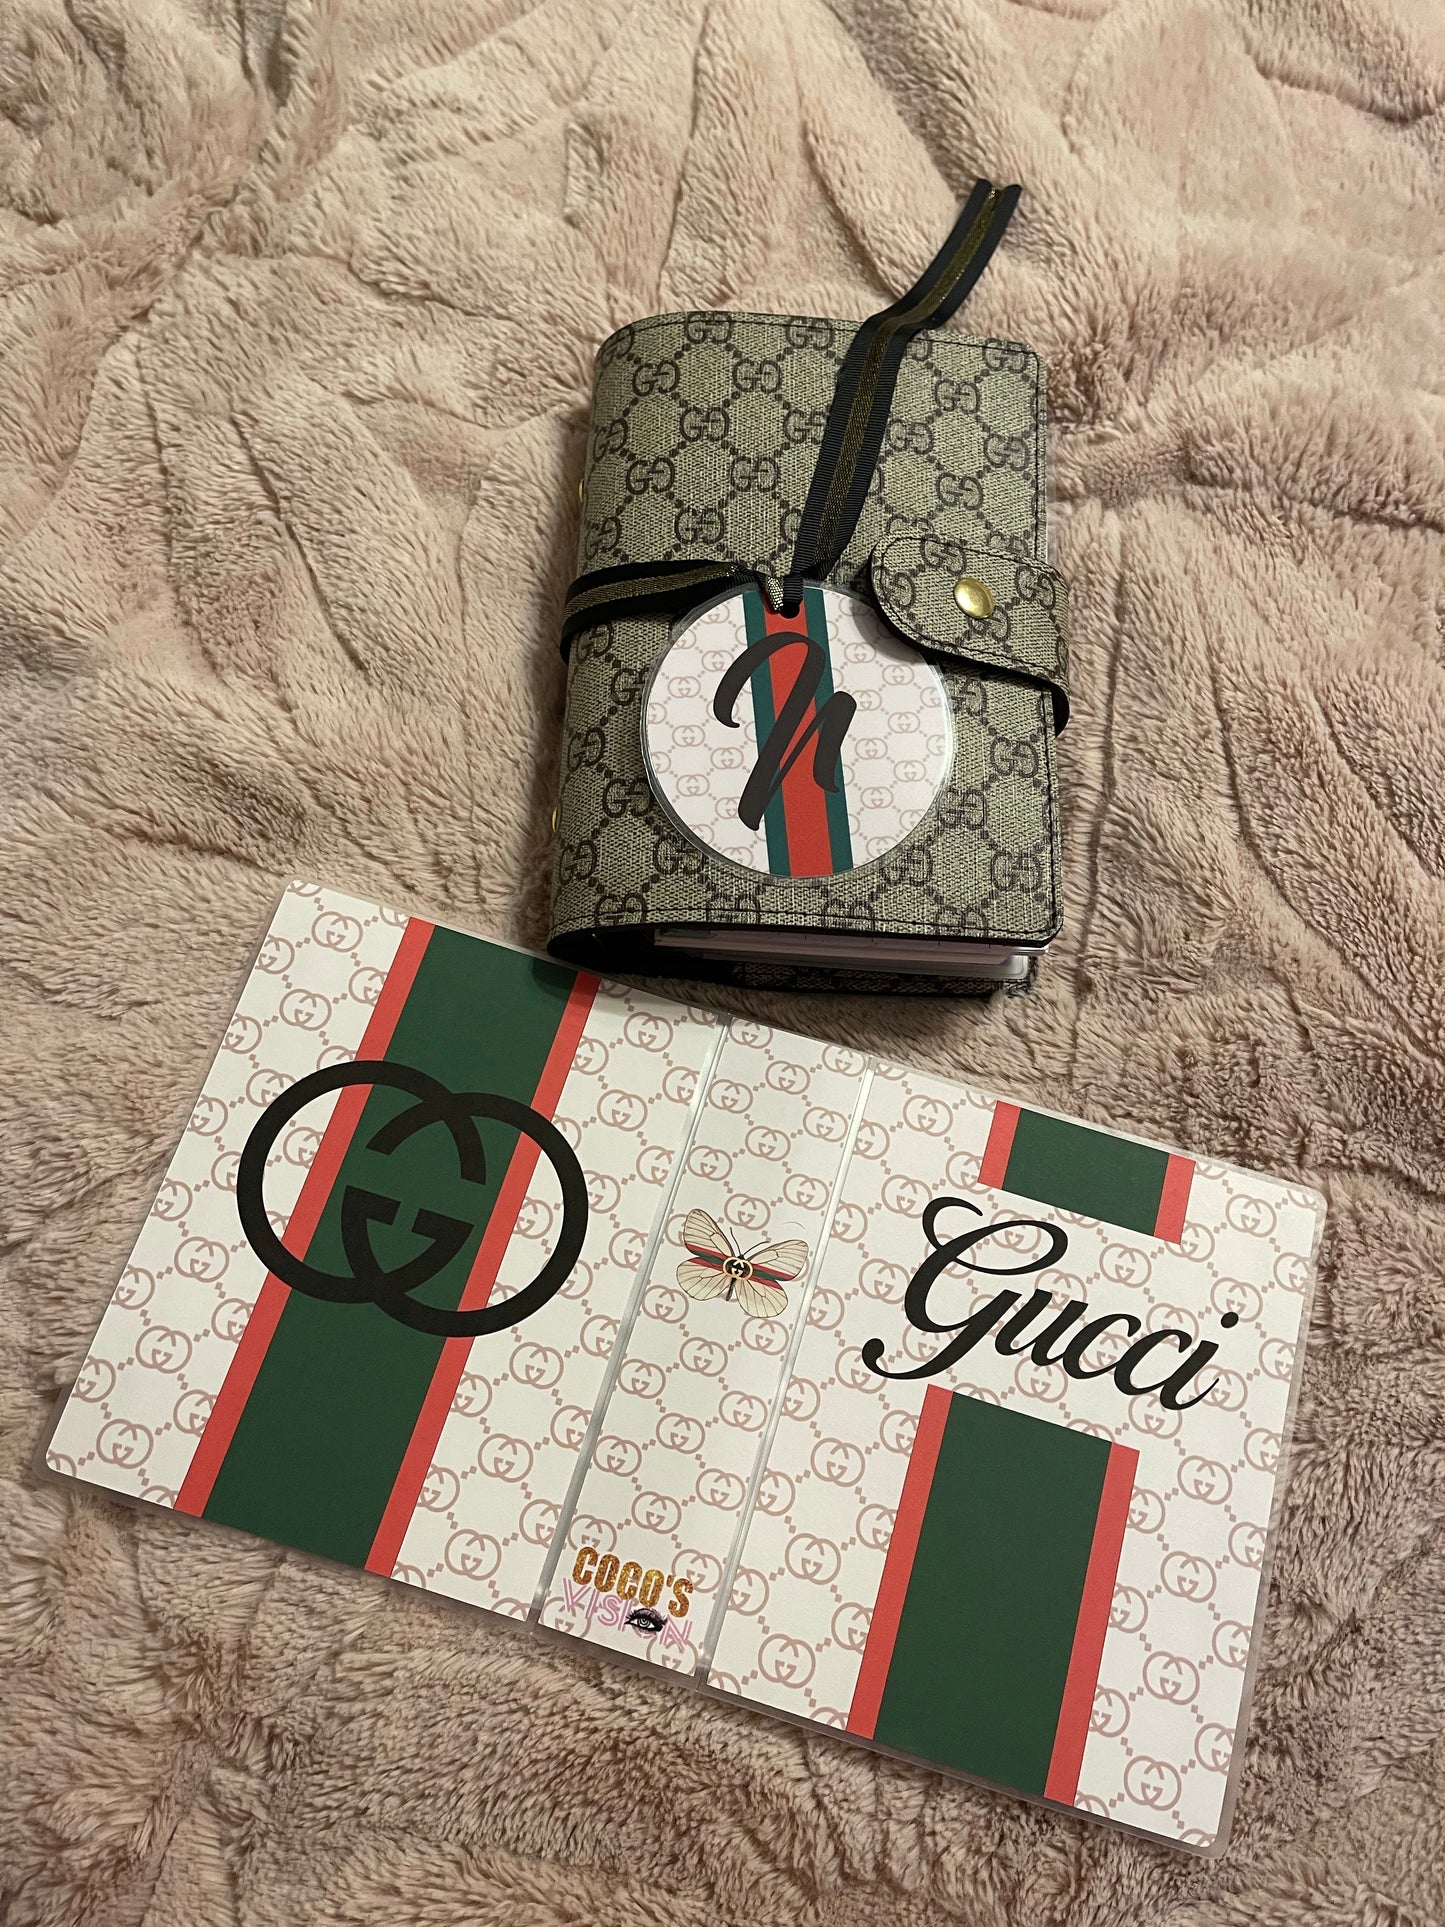 Gucc inspired Photo Albums